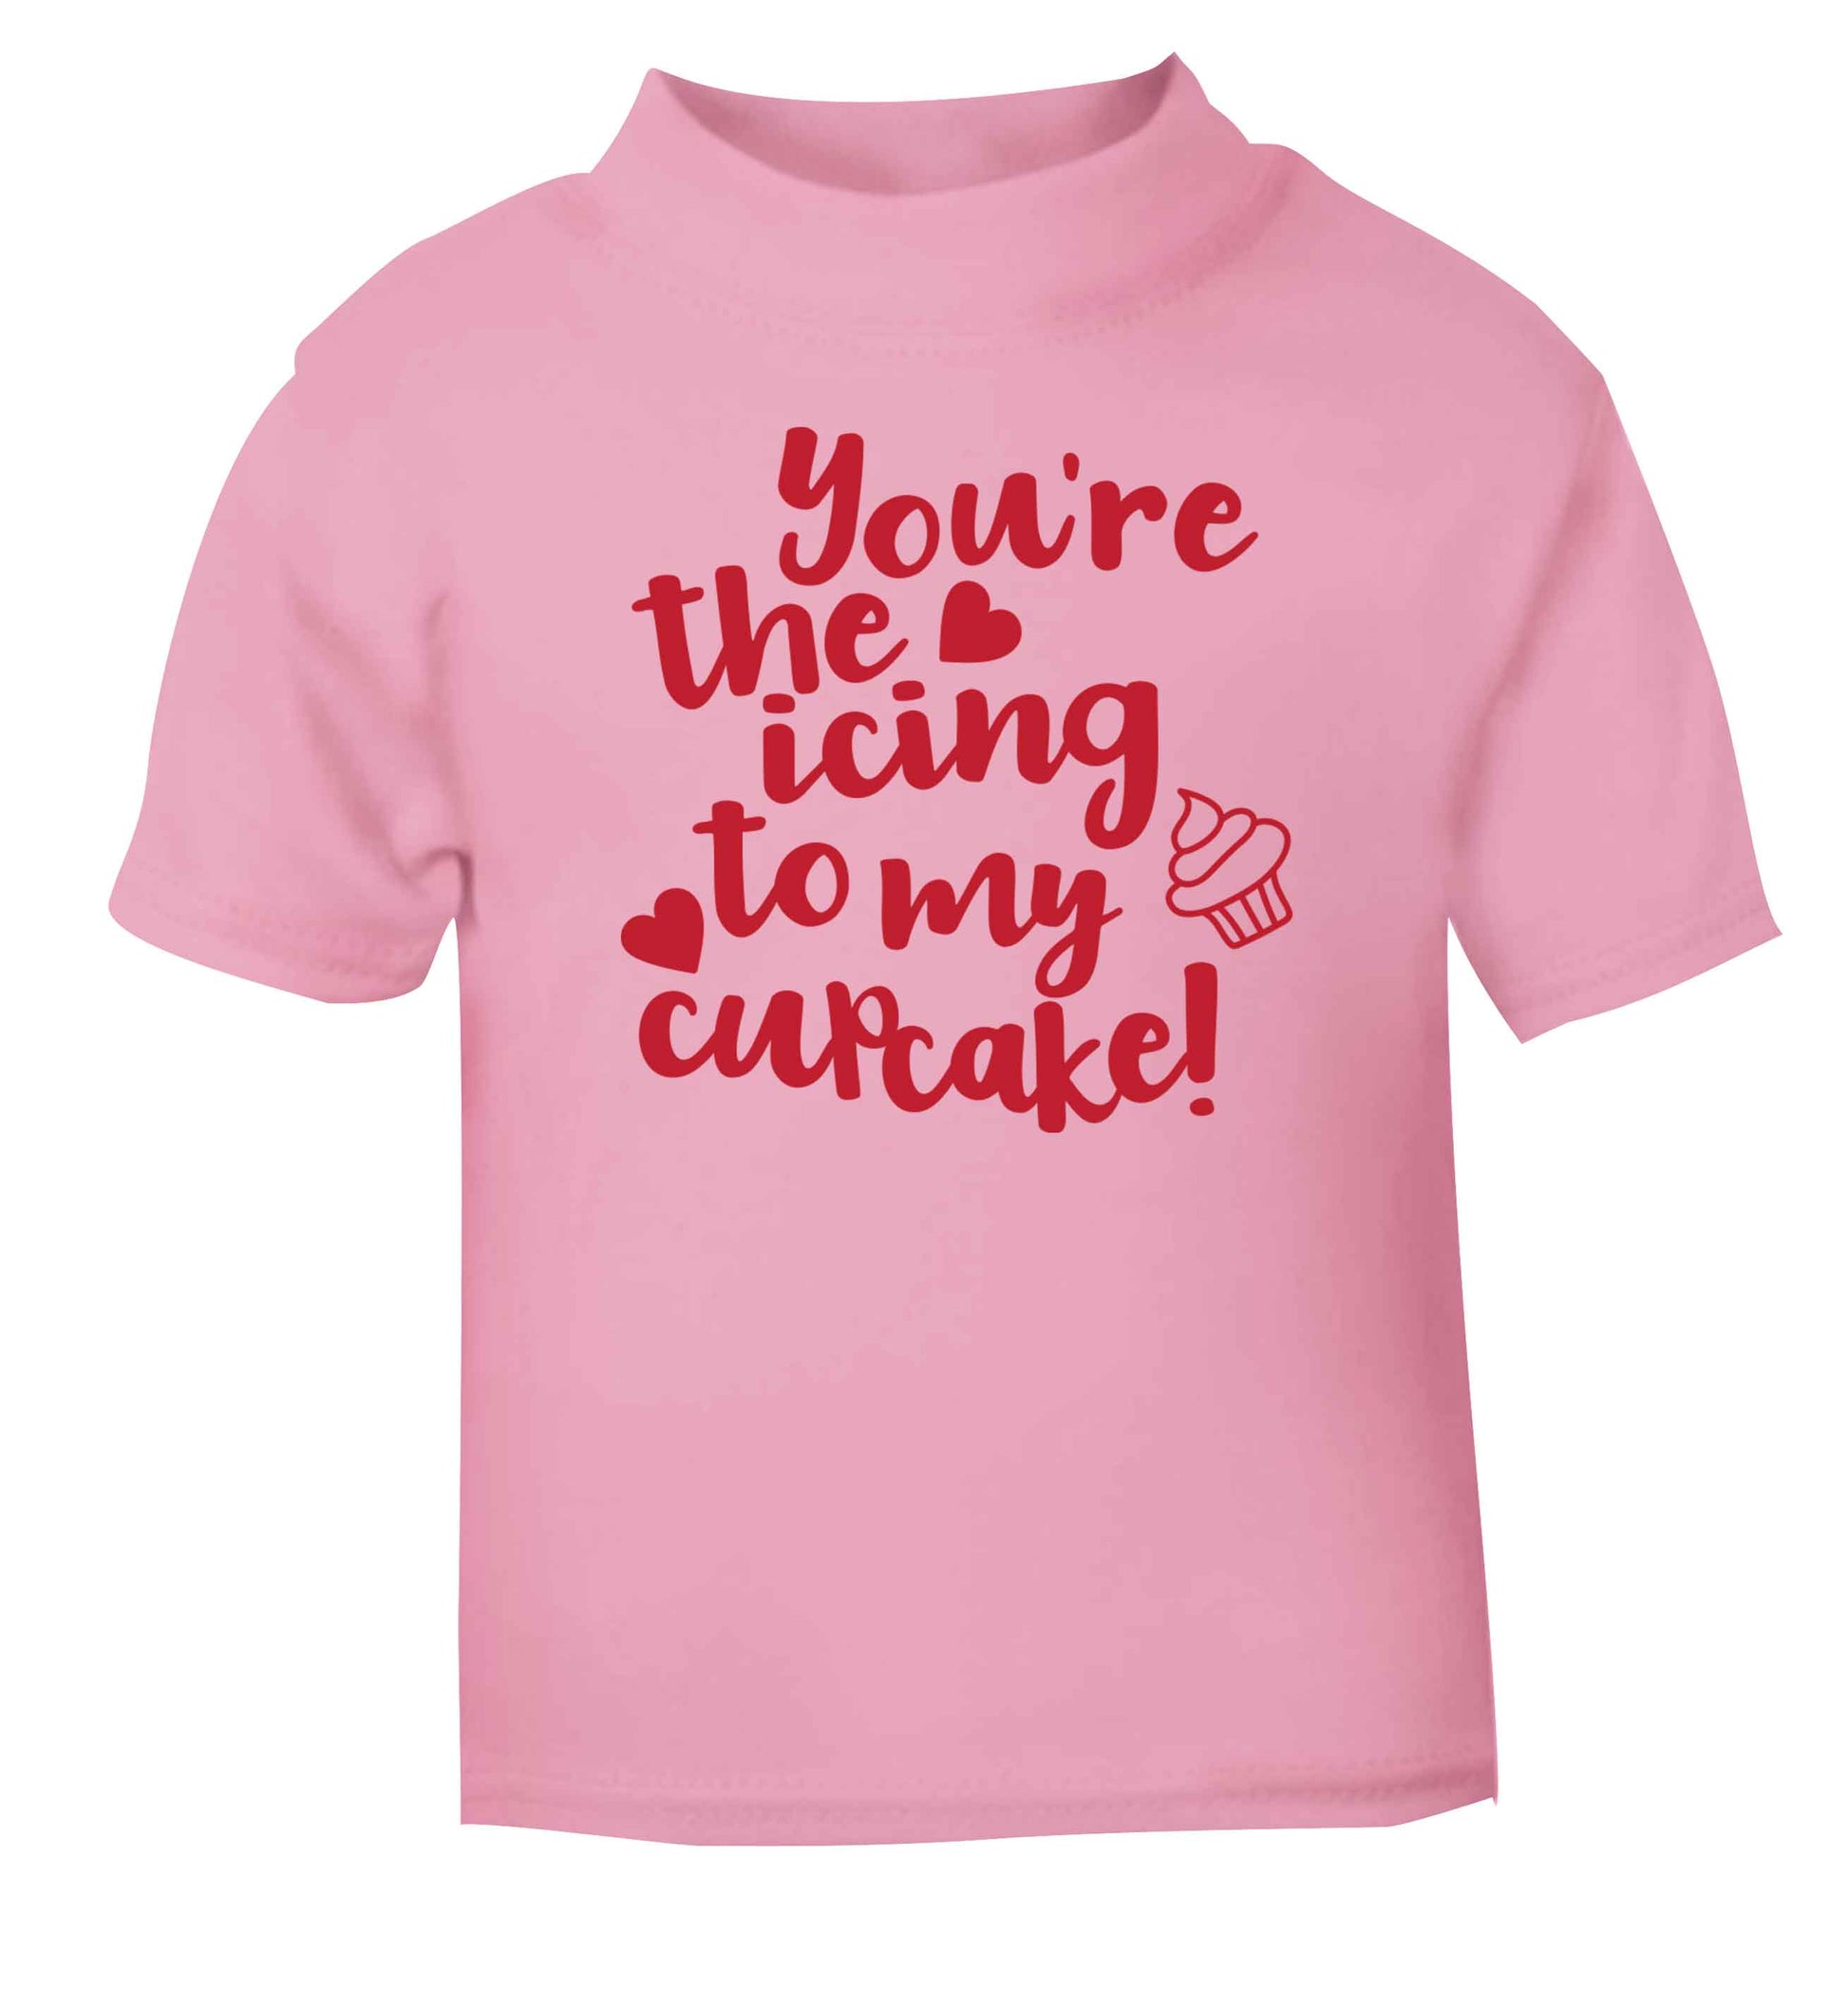 You're the icing to my cupcake light pink Baby Toddler Tshirt 2 Years